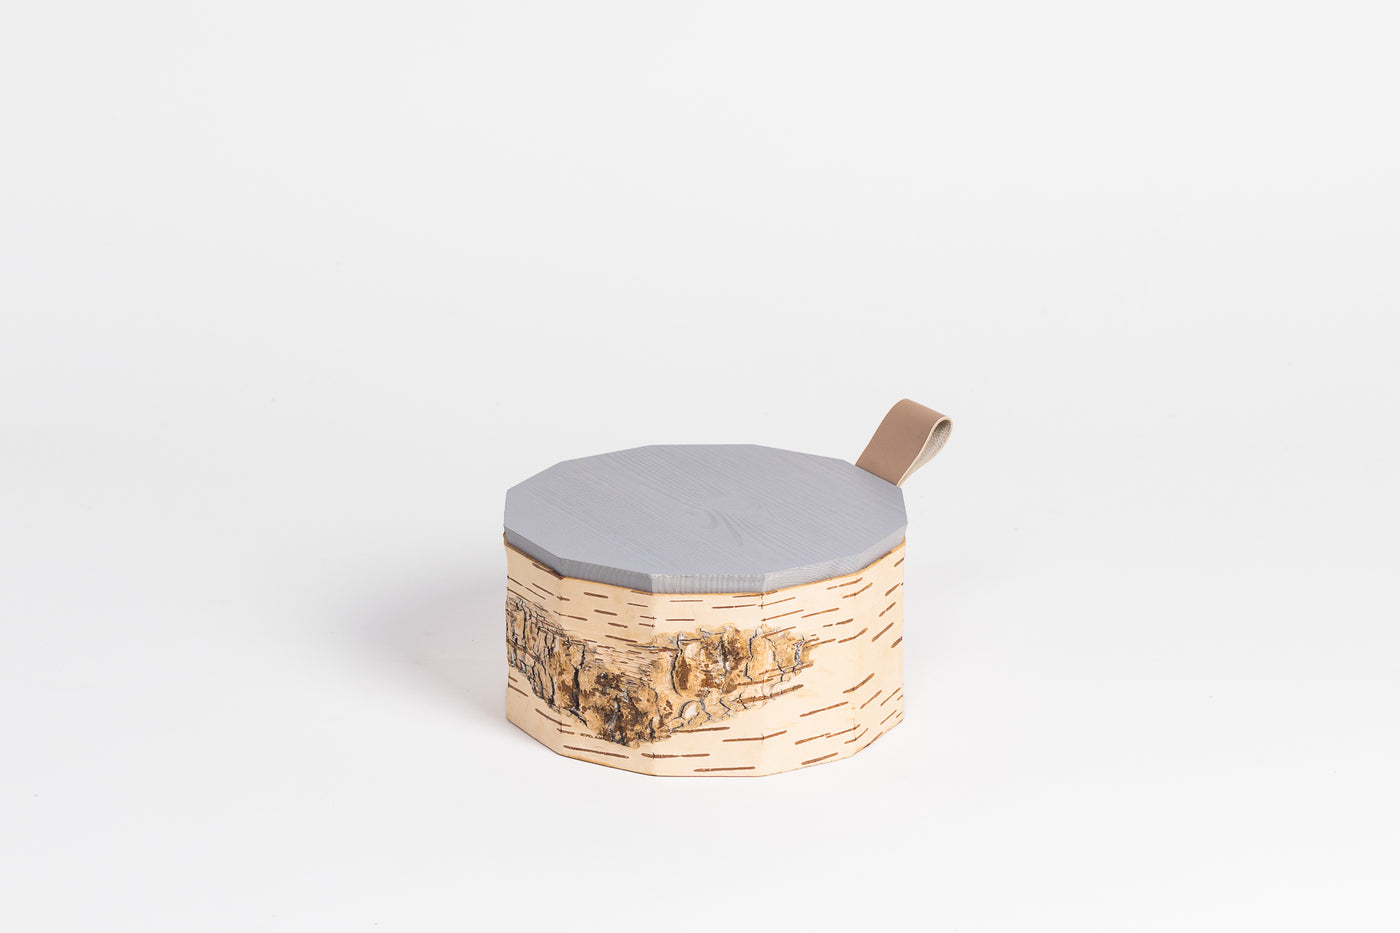 Tuesa Küpsis Birch Bark Containers-Cooking and Eating-BIRCH BARK, BOXES / ORGANISERS / CONTAINERS-Forest Homes-Nature inspired decor-Nature decor